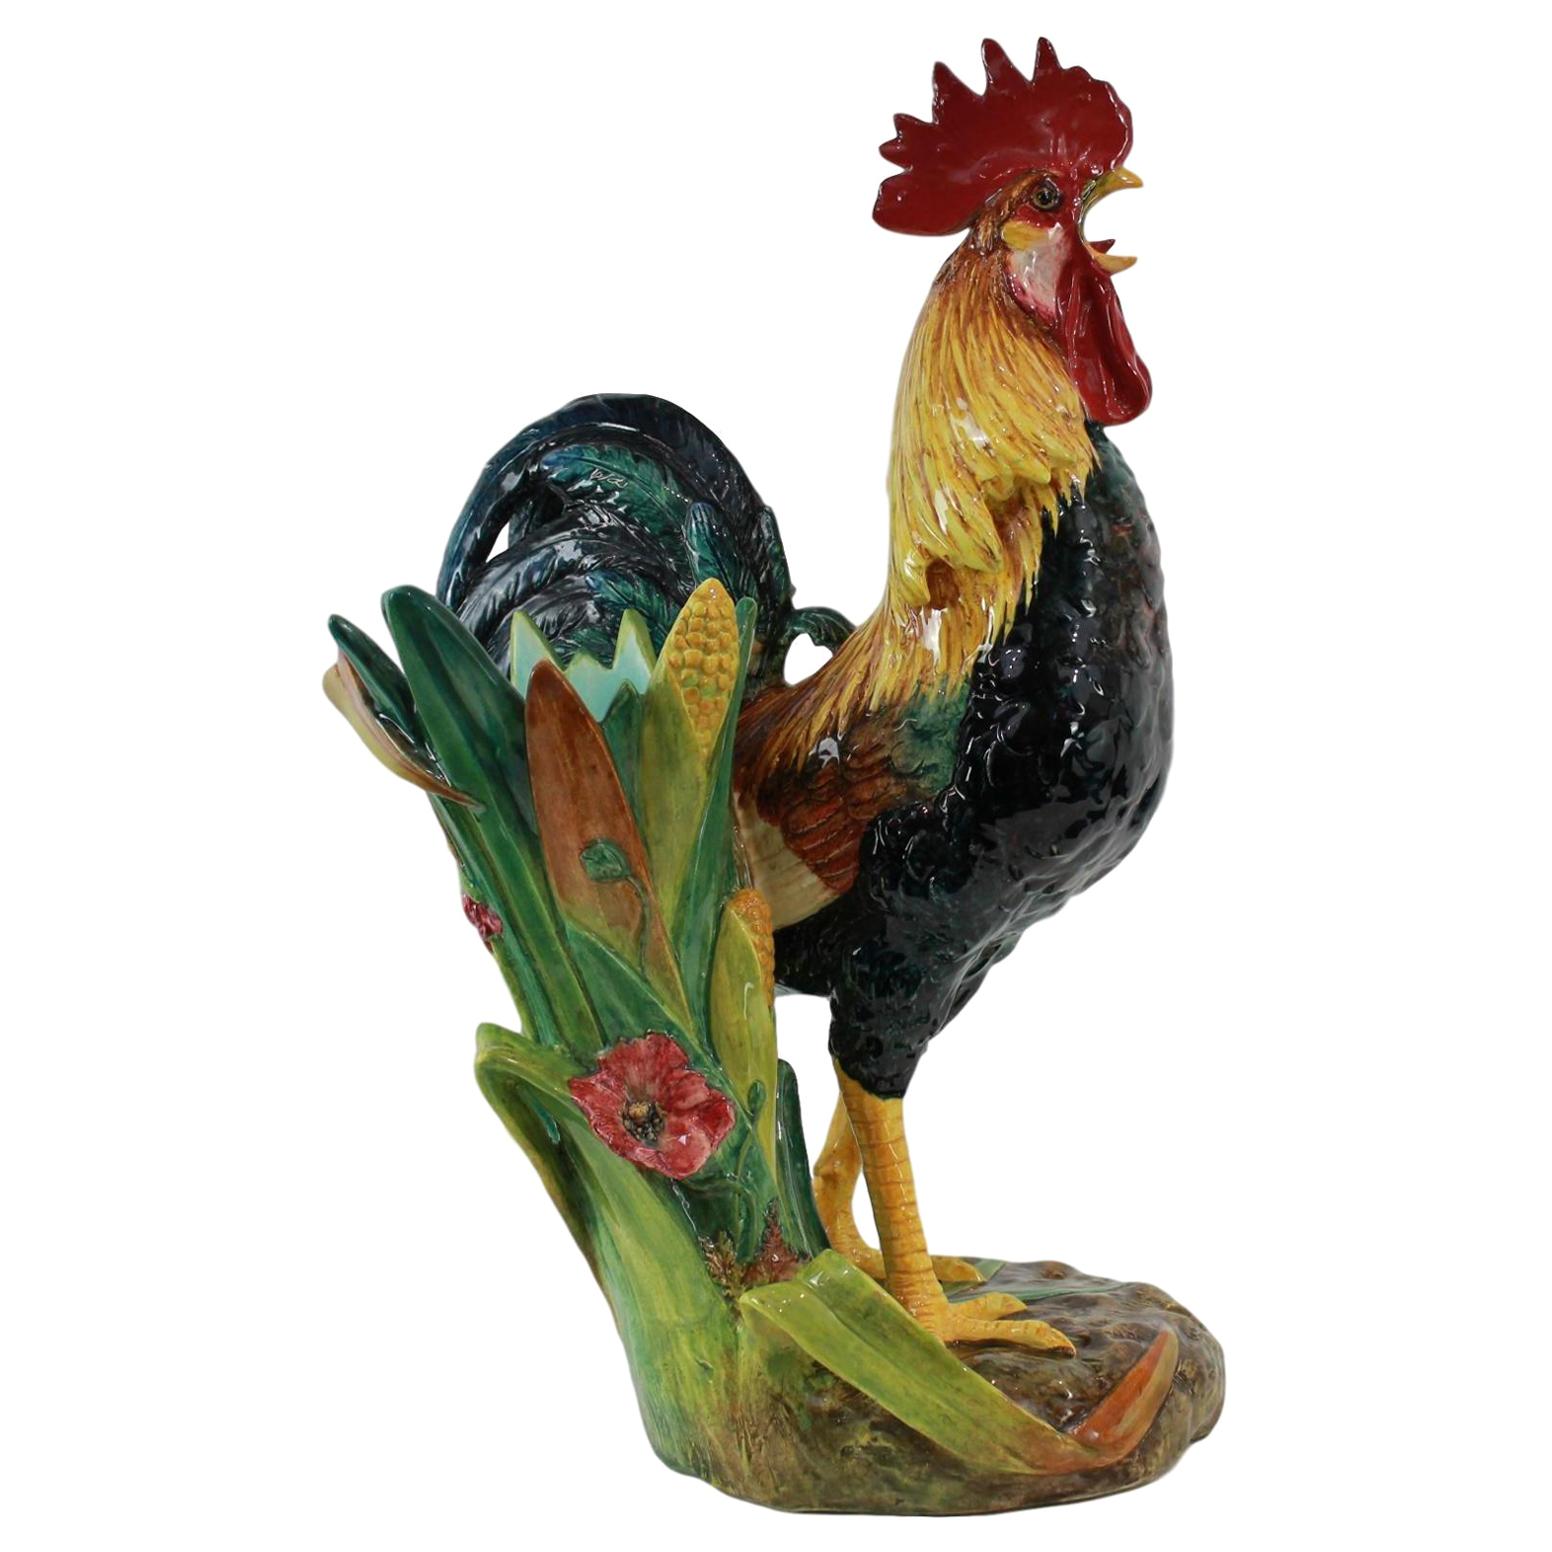 Very Large Majolica Rooster Vase by Delphin Massier, French, circa 1880